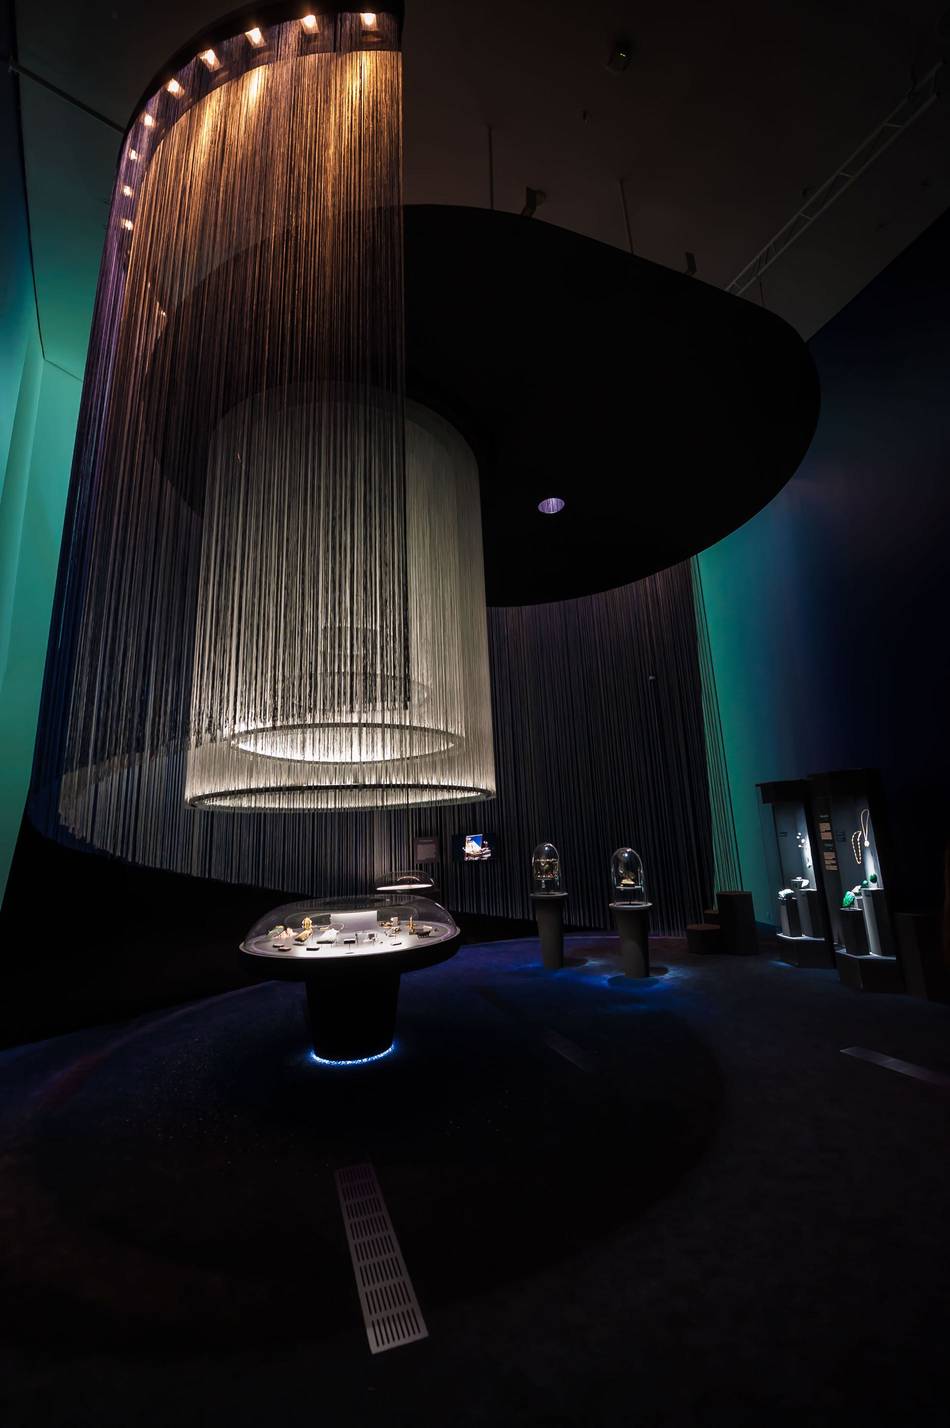 The ArtScience Museum will showcase over 400 stunning creations from Van Cleef & Arpels and 250 minerals from the French National Museum of Natural History Collection